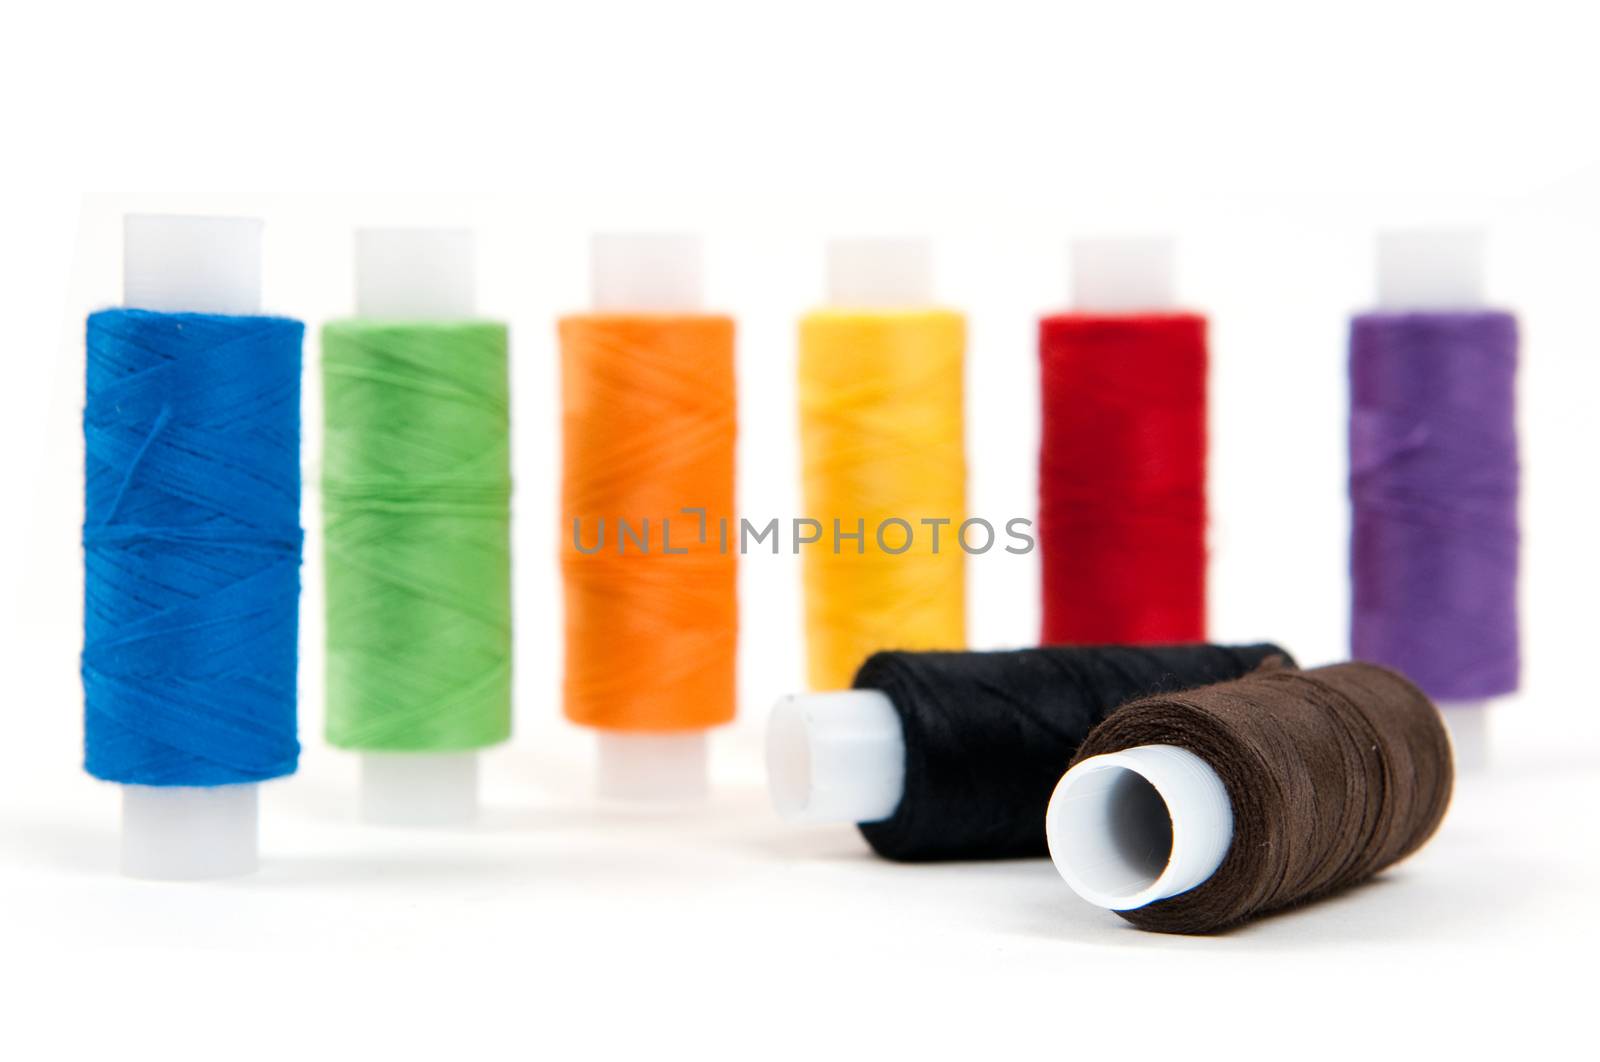 Set of sewing threads on white backgrounds by lexan